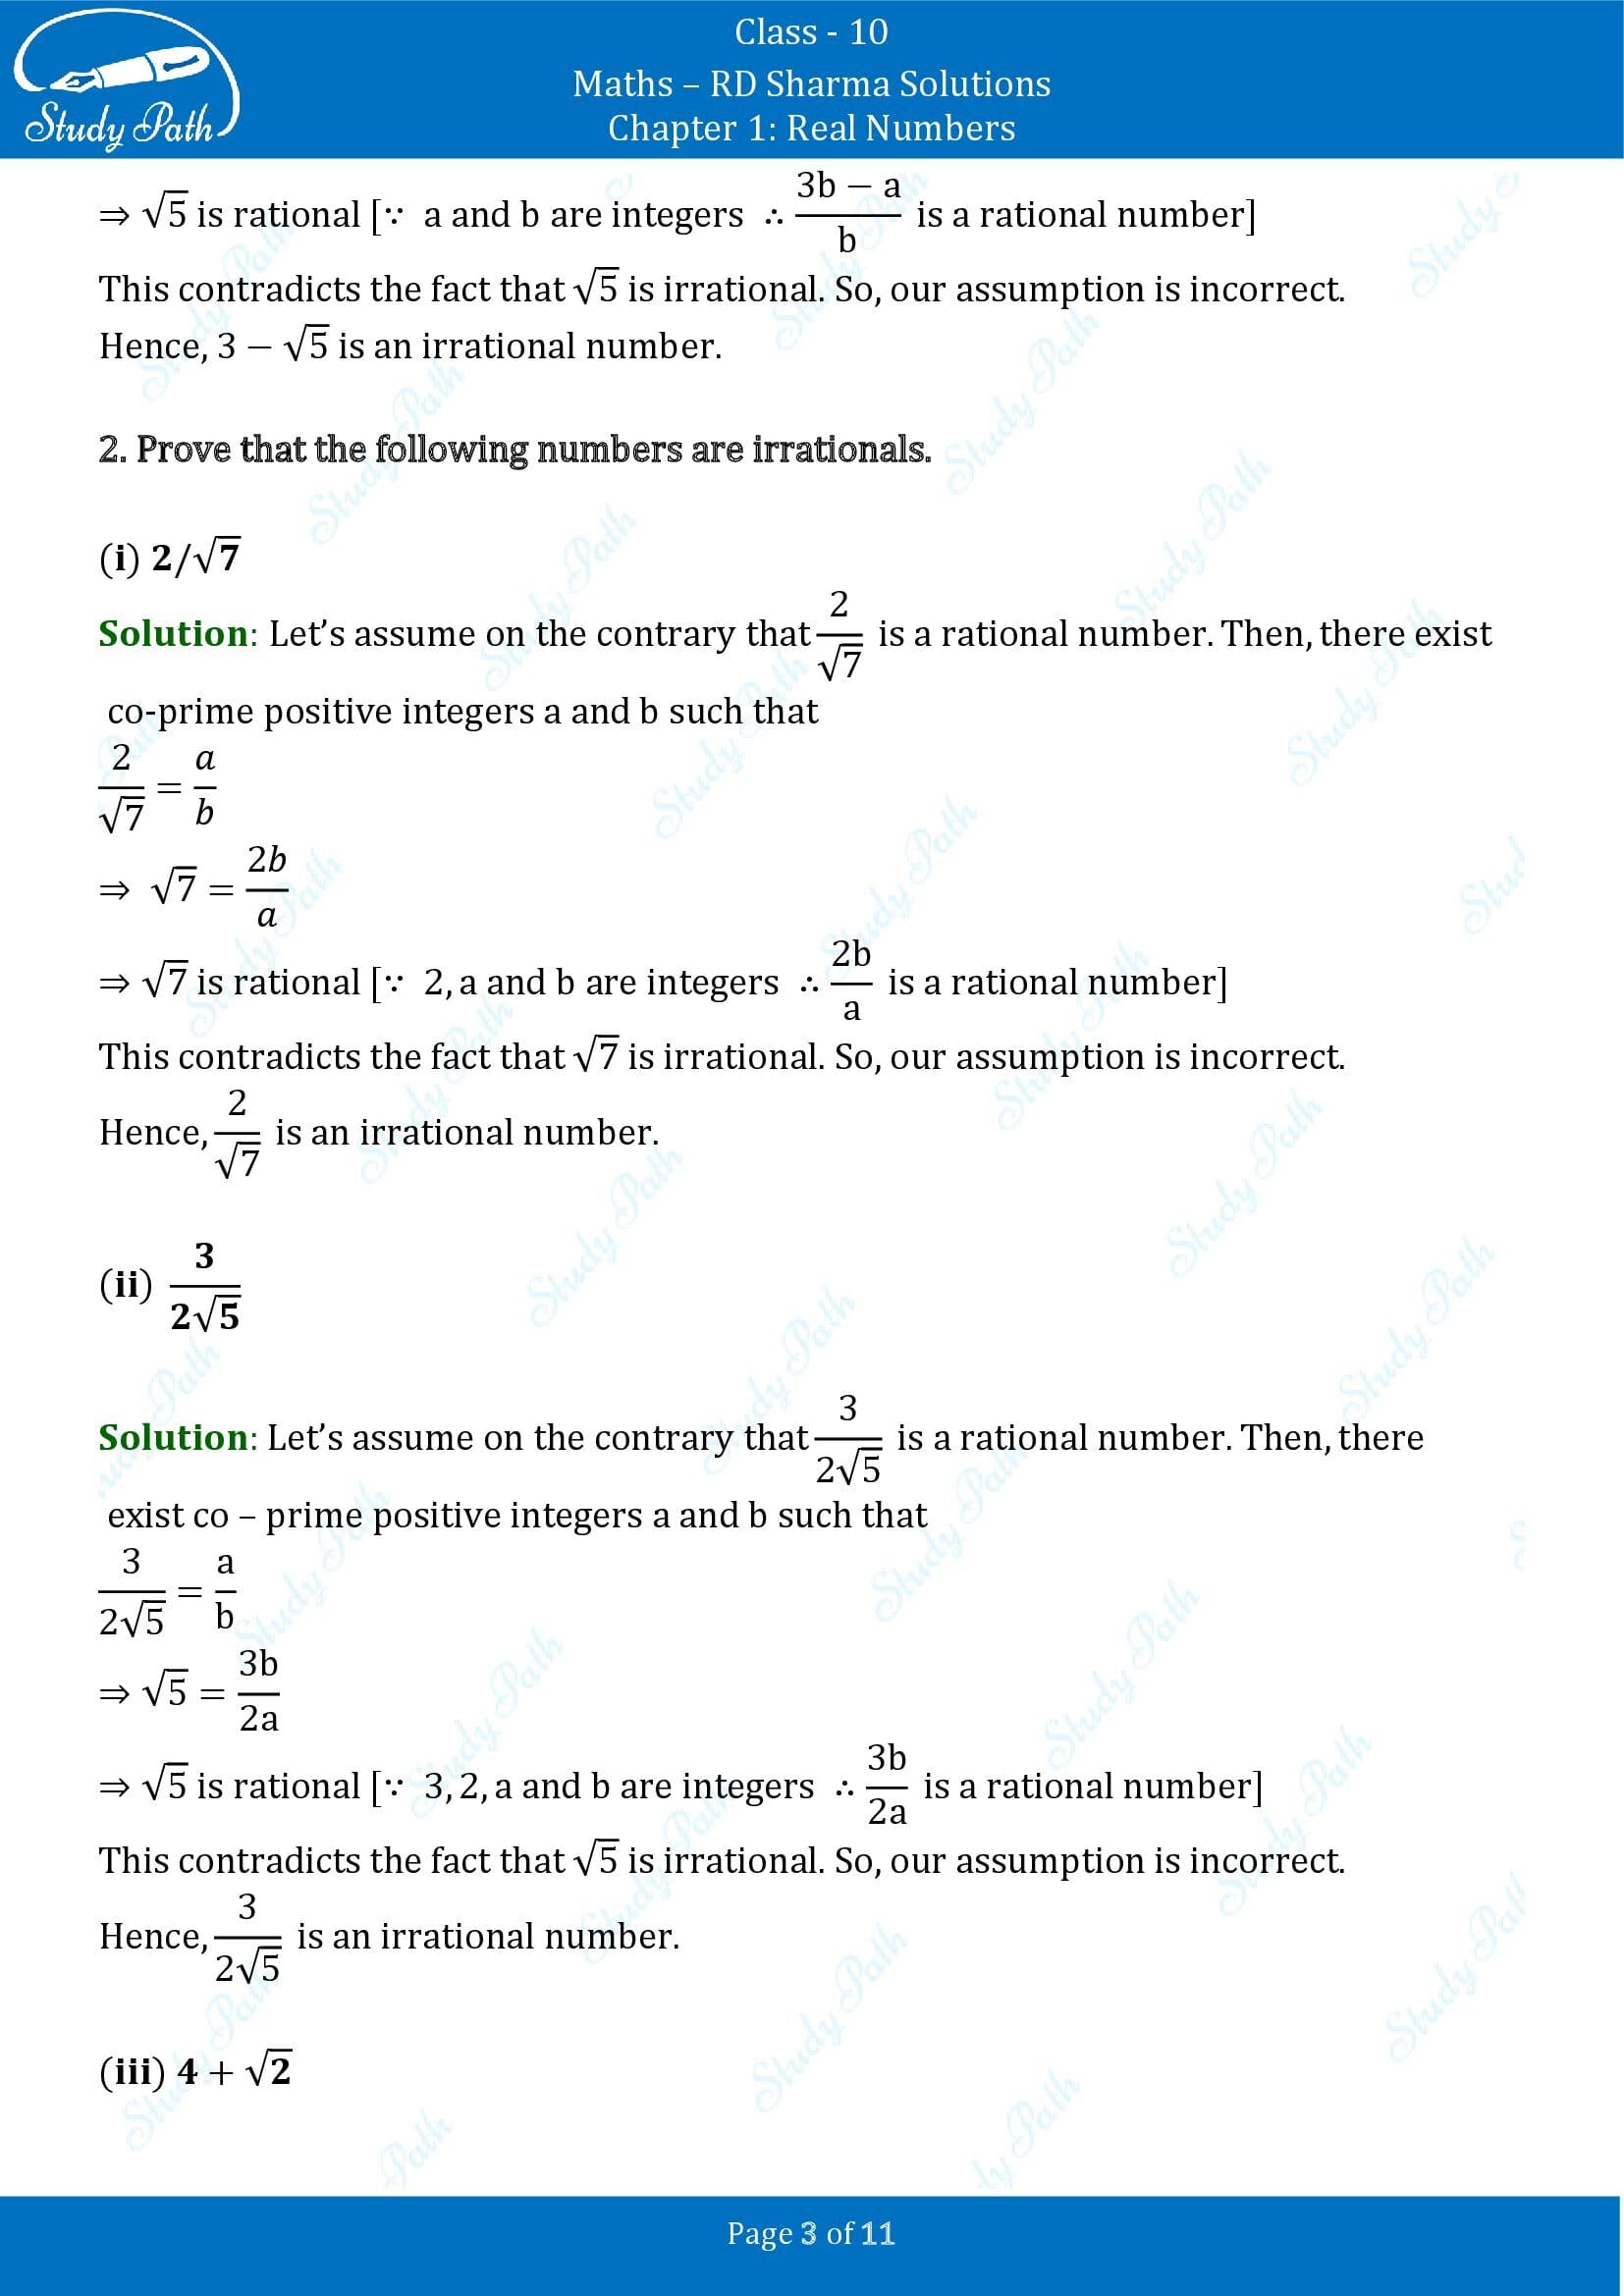 RD Sharma Solutions Class 10 Chapter 1 Real Numbers Exercise 1.5 00003